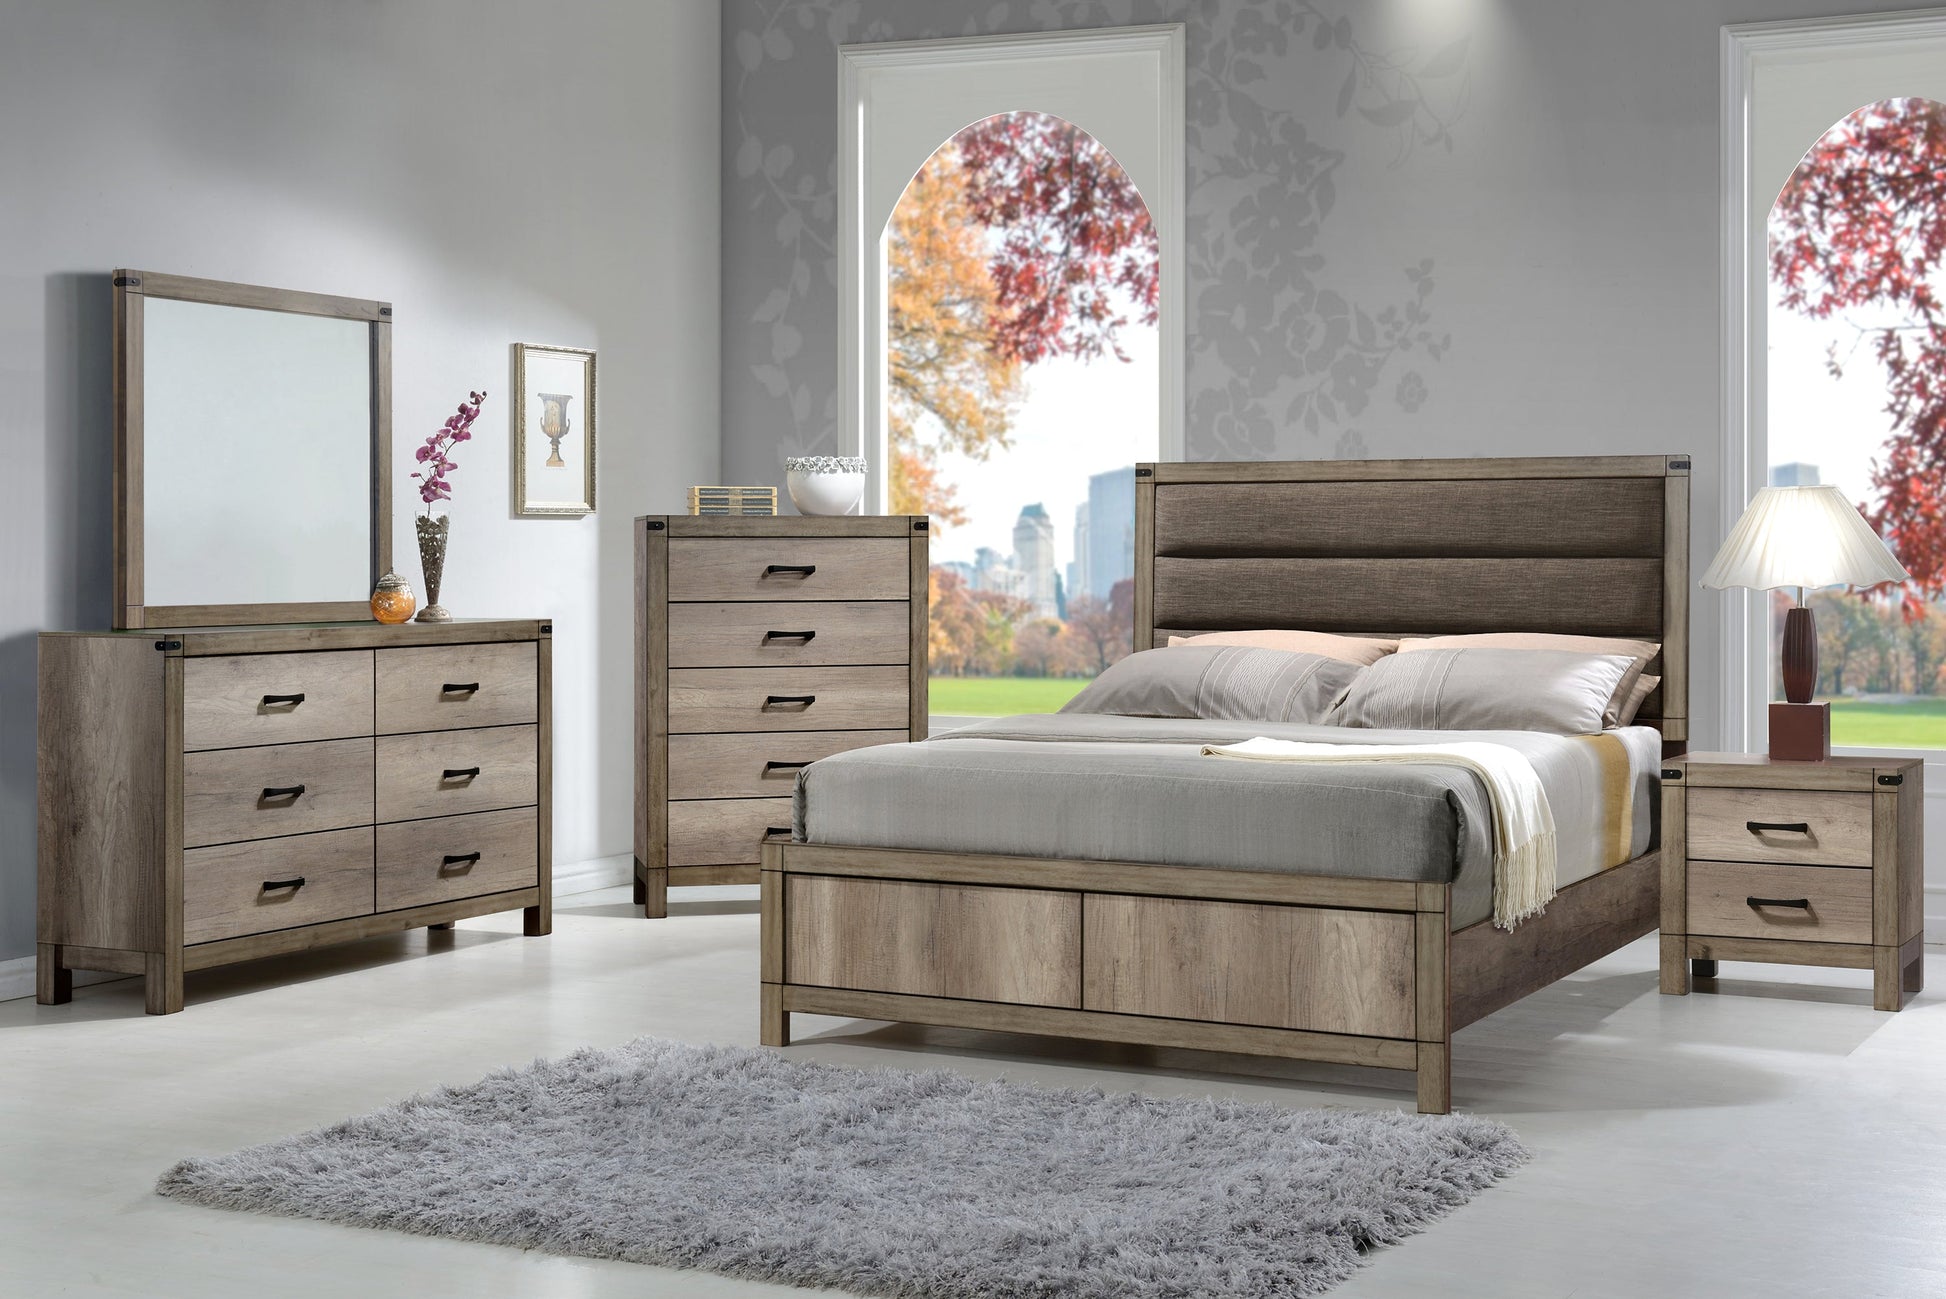 Matteo Melamine Finish Fabric Upholstered Panel Bedroom Set, Heat, Moisture, Stain Resistant, Contemporary Rustic